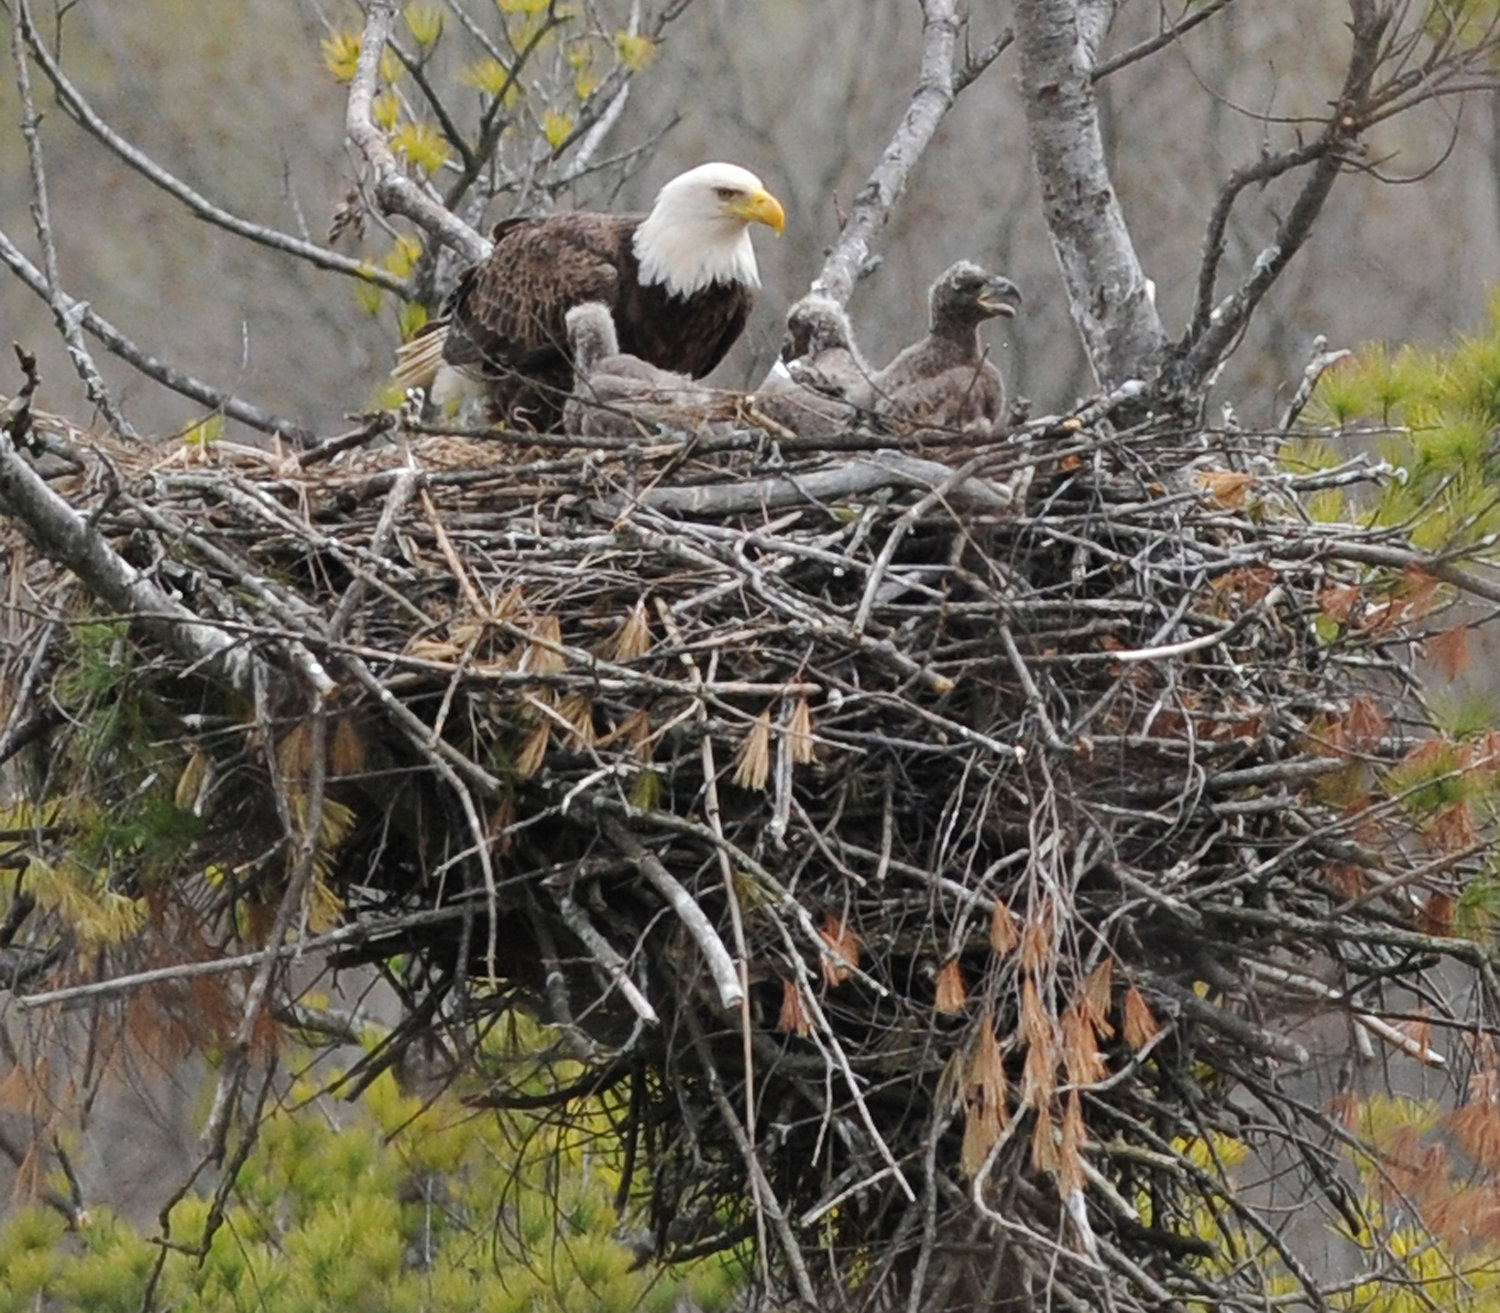 AVIAN FLU SPREADING — An adult bald eagle is shown with three eaglets in the nest in Floyd in this file photo. State Department of Environmental Conservation officials warn that the avian flu is spreading across much of New York among birds of prey, such as eagles, waterfowl and other bird  species.